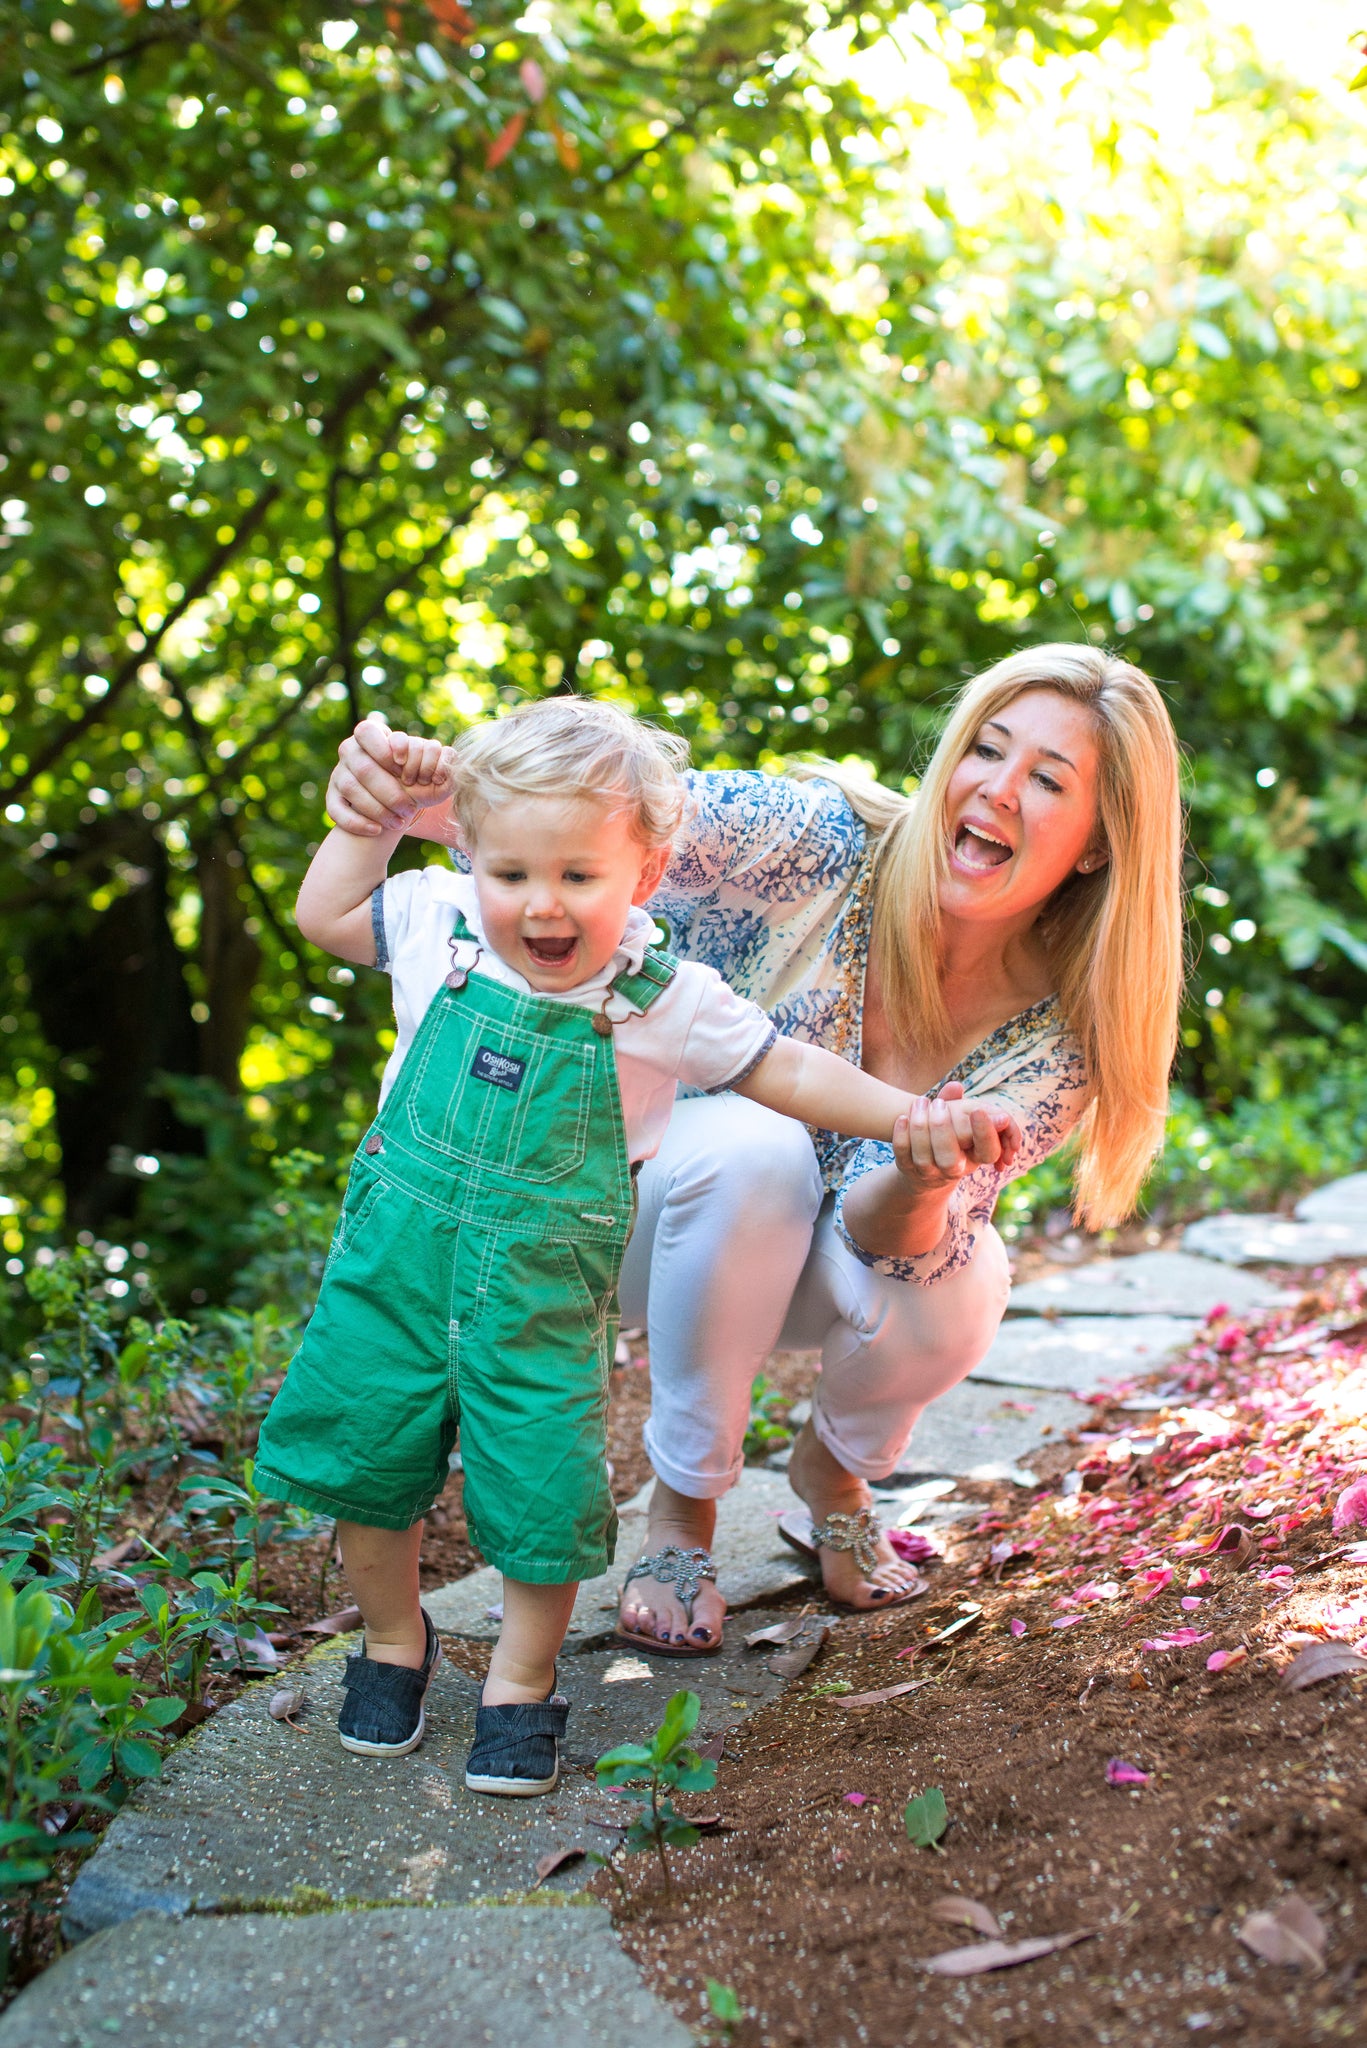 Joylux founder, Colette Courtion, with her son playing outside.